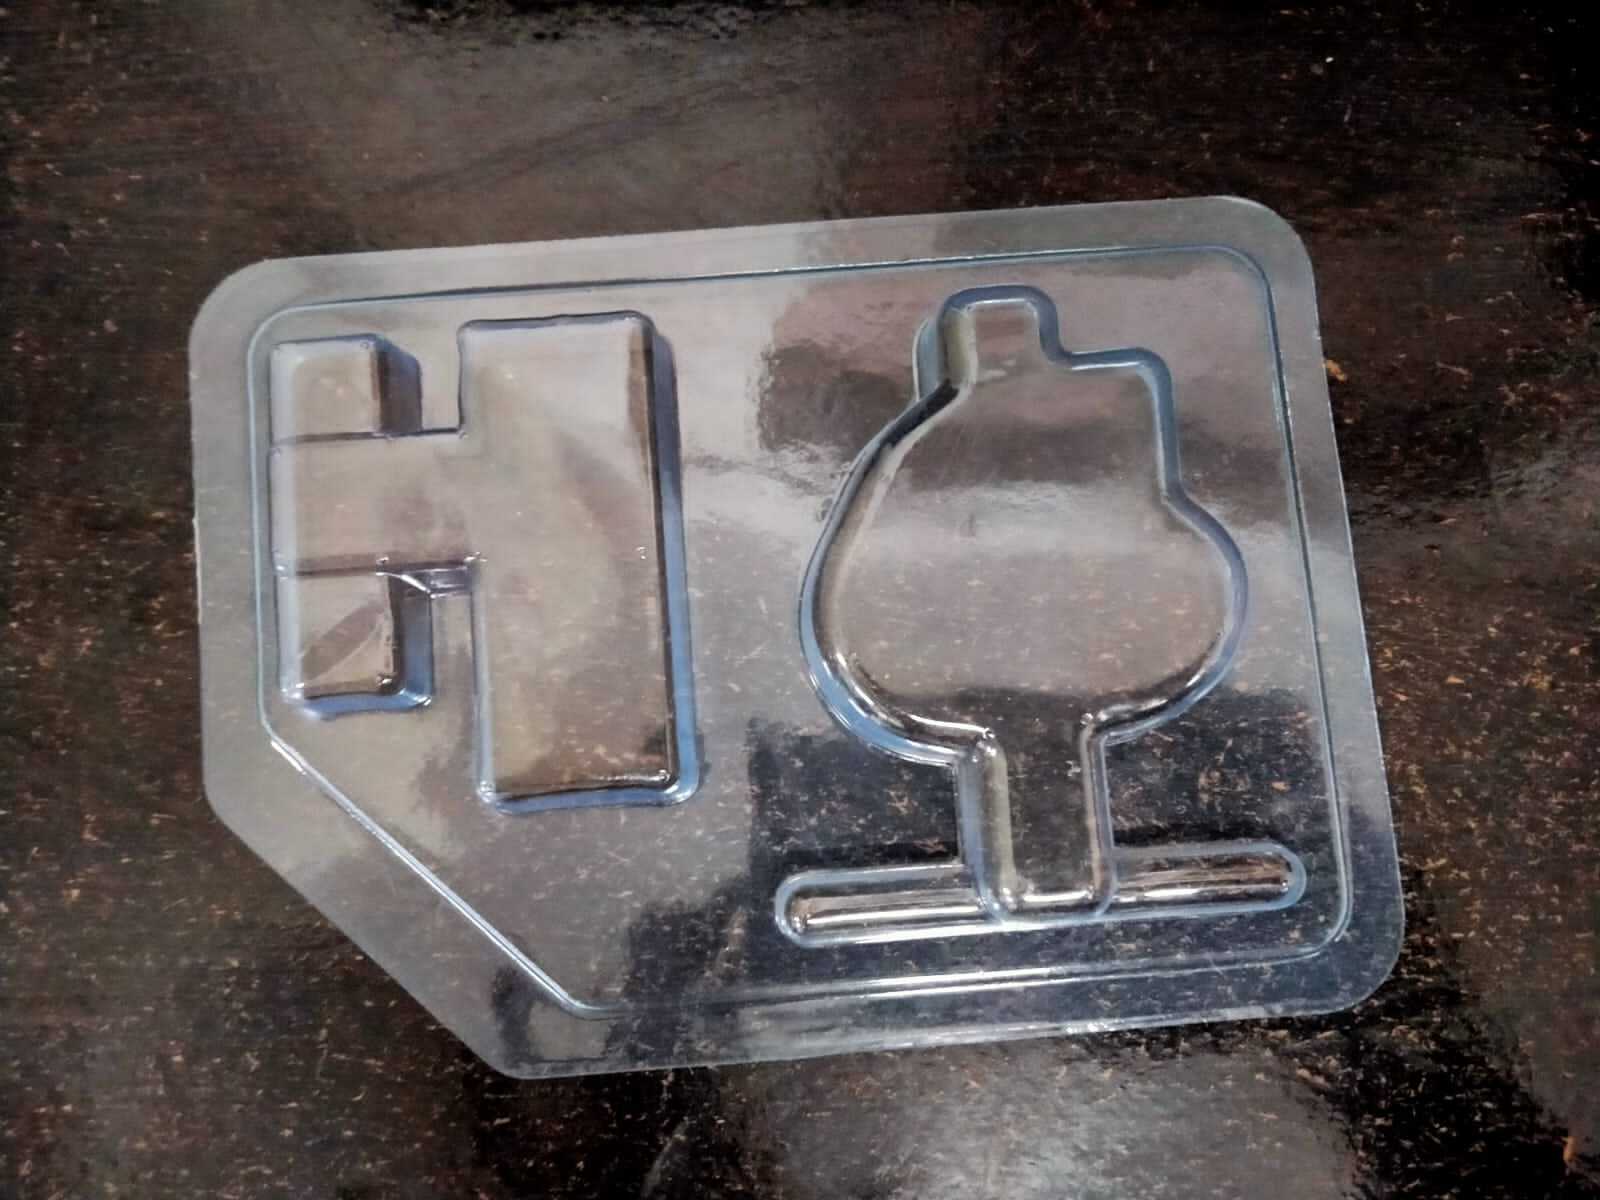 Plastic Tool Forming Packaging Tray